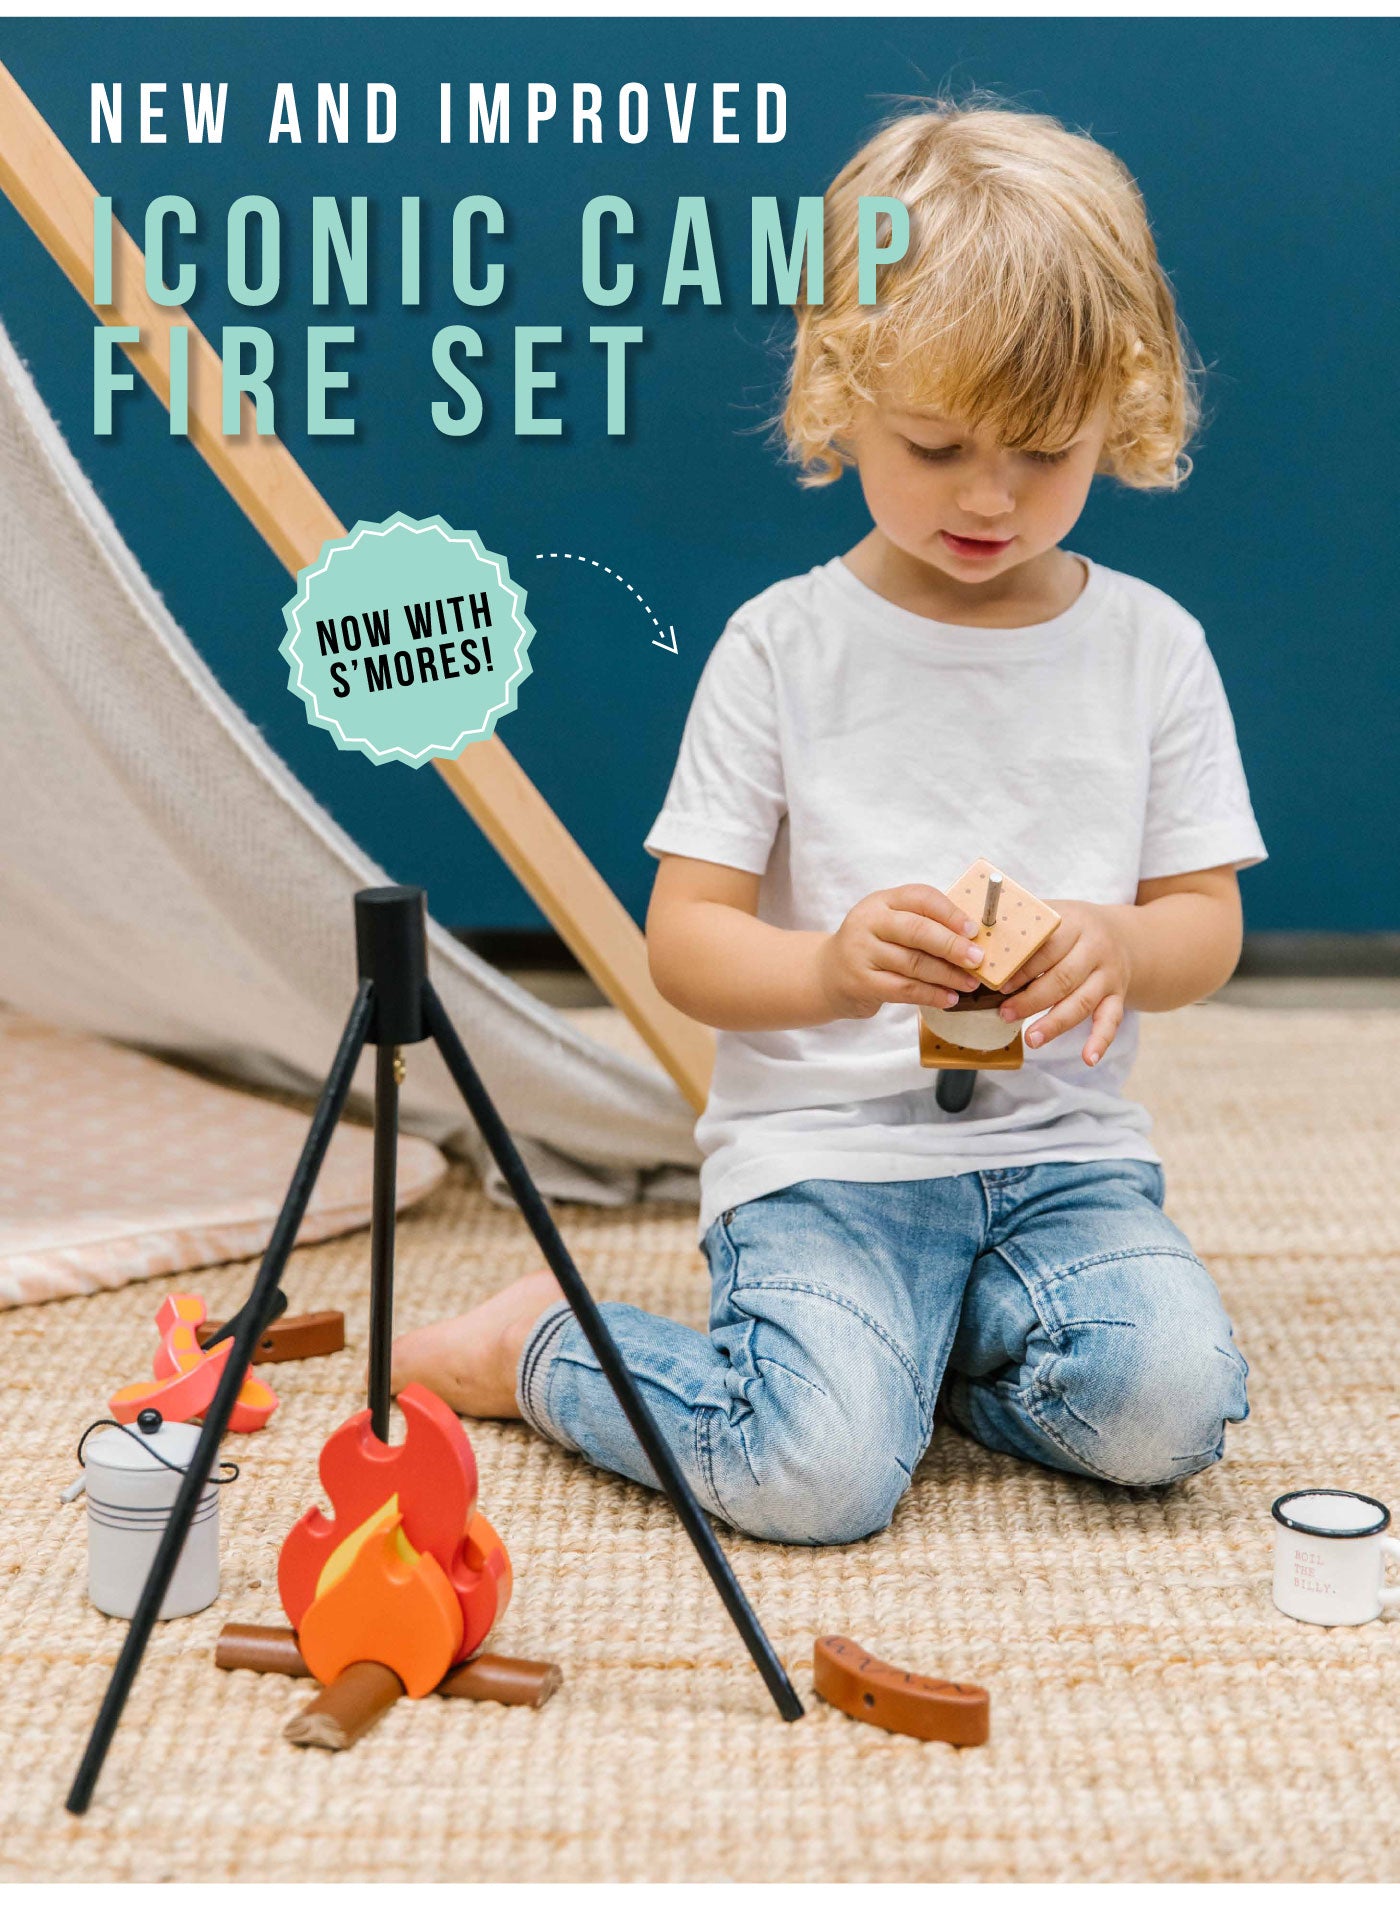 makemeiconicwoodentoyscampfire